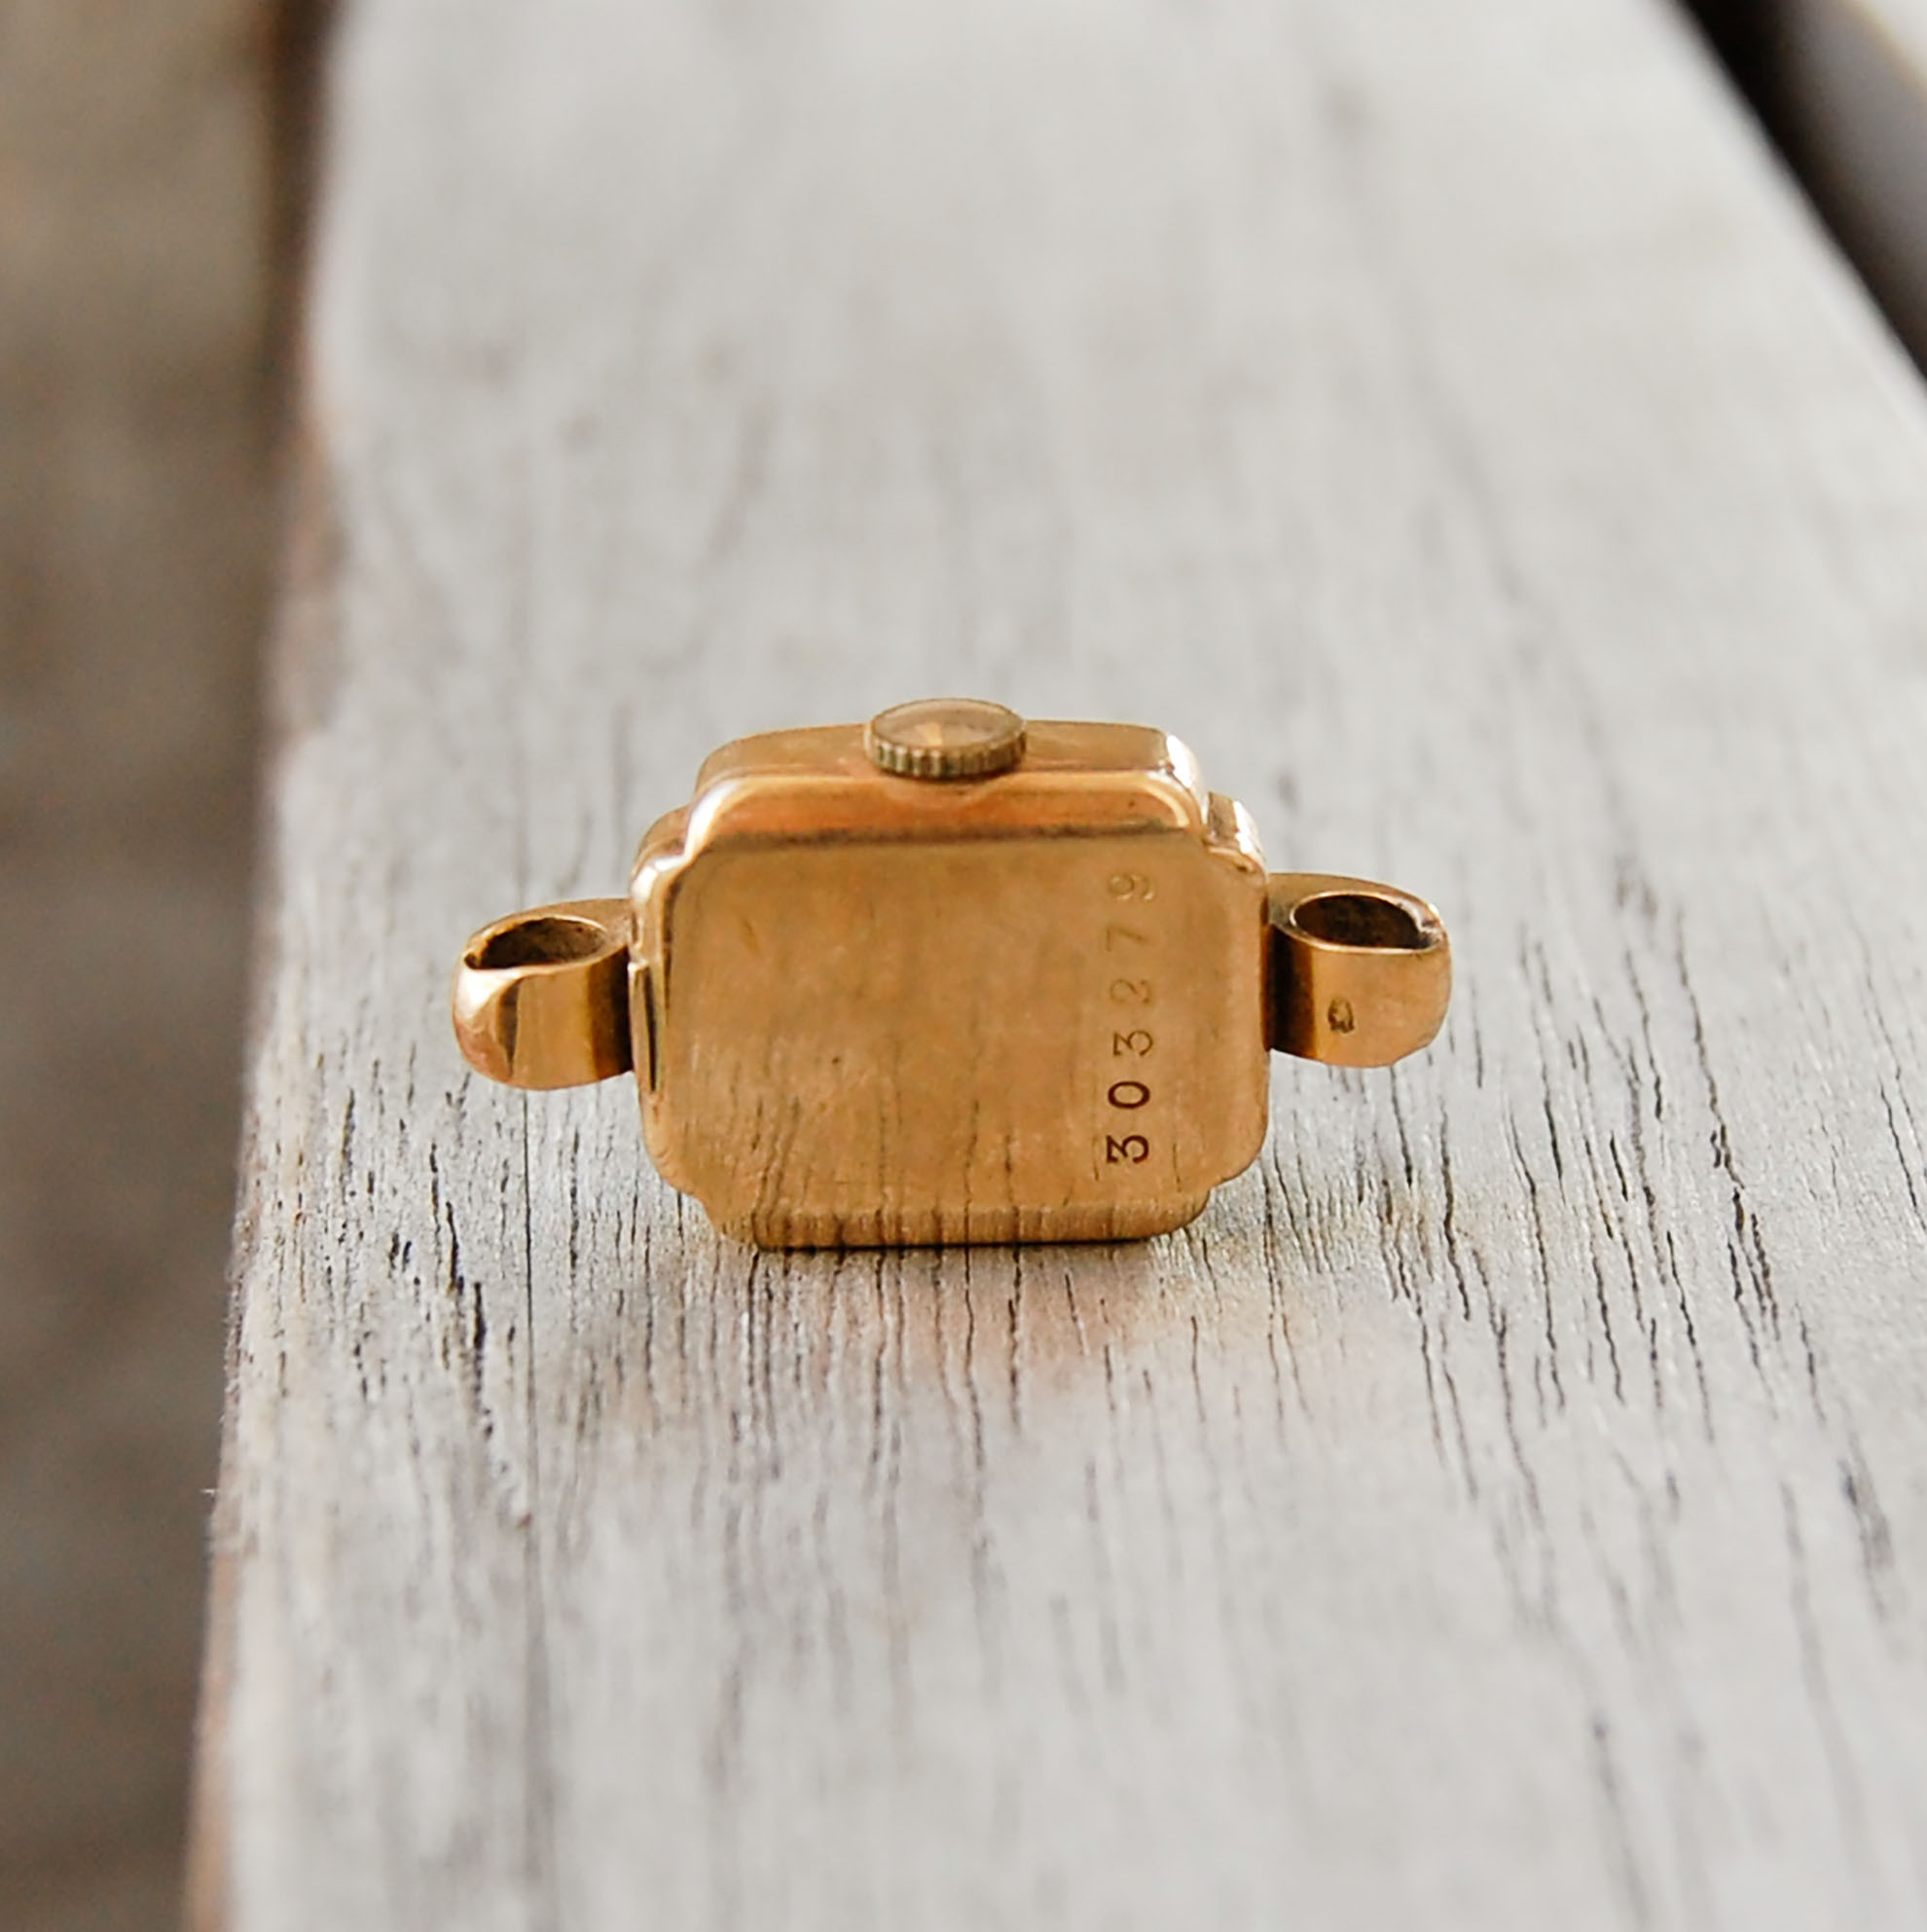 Vintage Jean Louis Roehrich Gold Watch Charm — Lifestyle with Lynn